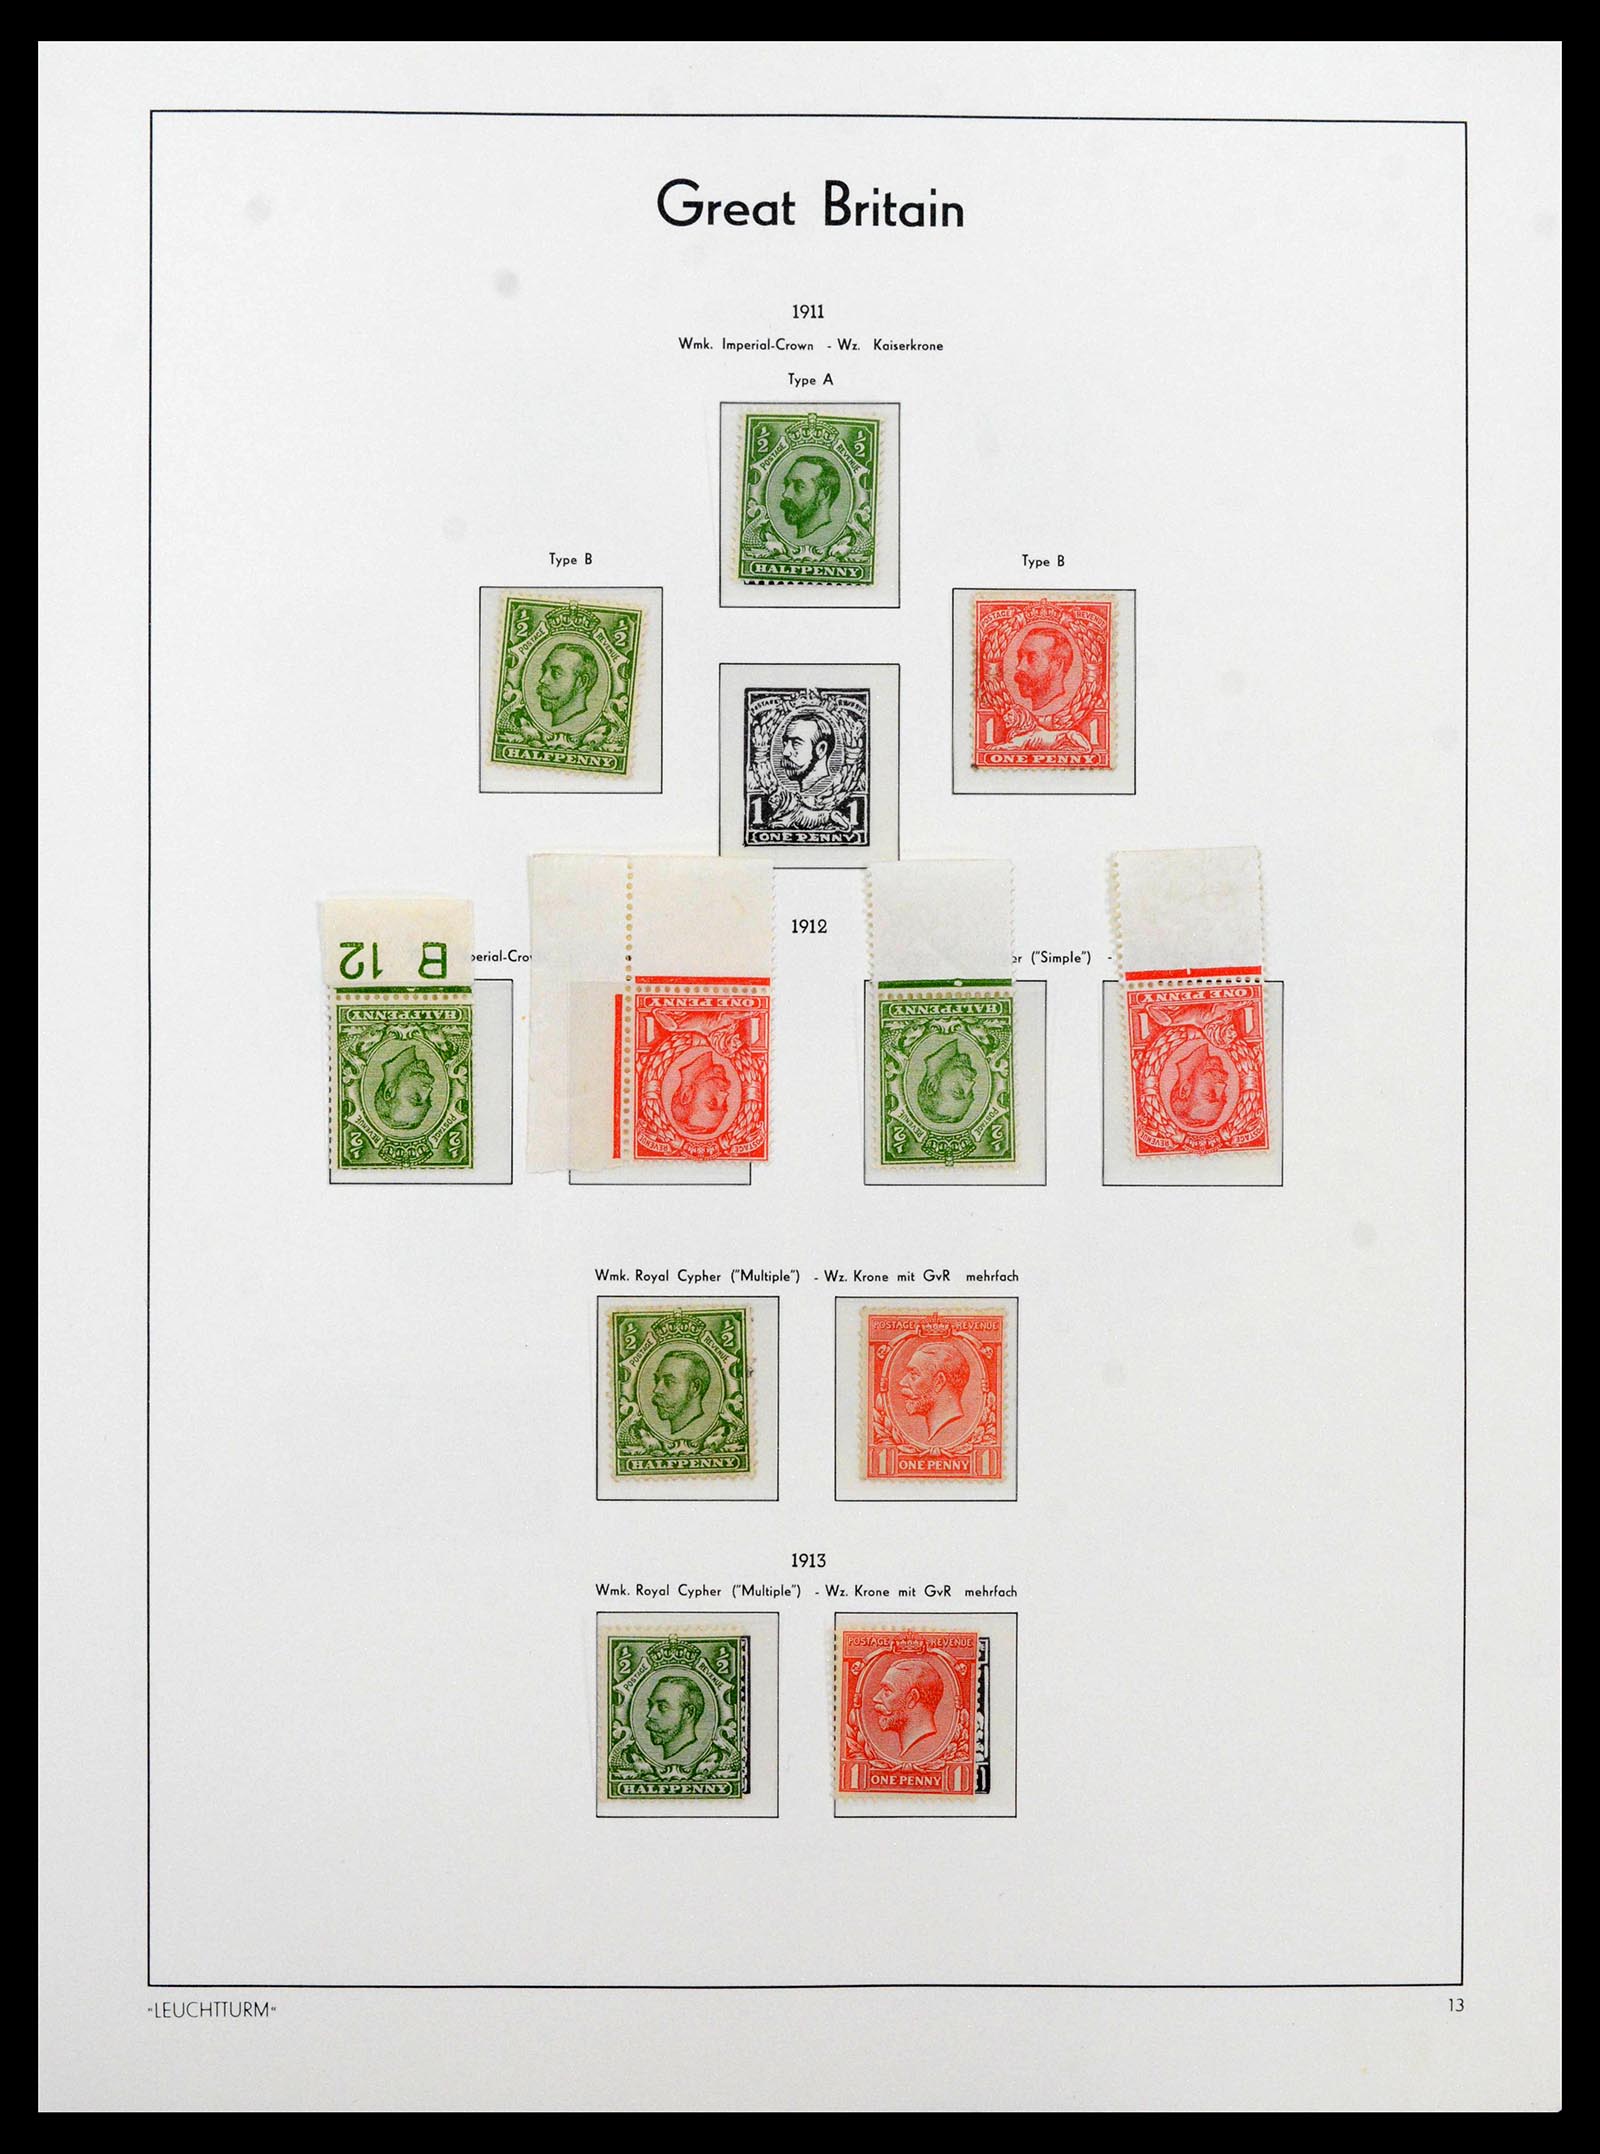 39150 0015 - Stamp collection 39150 Great Britain 1840-1984.